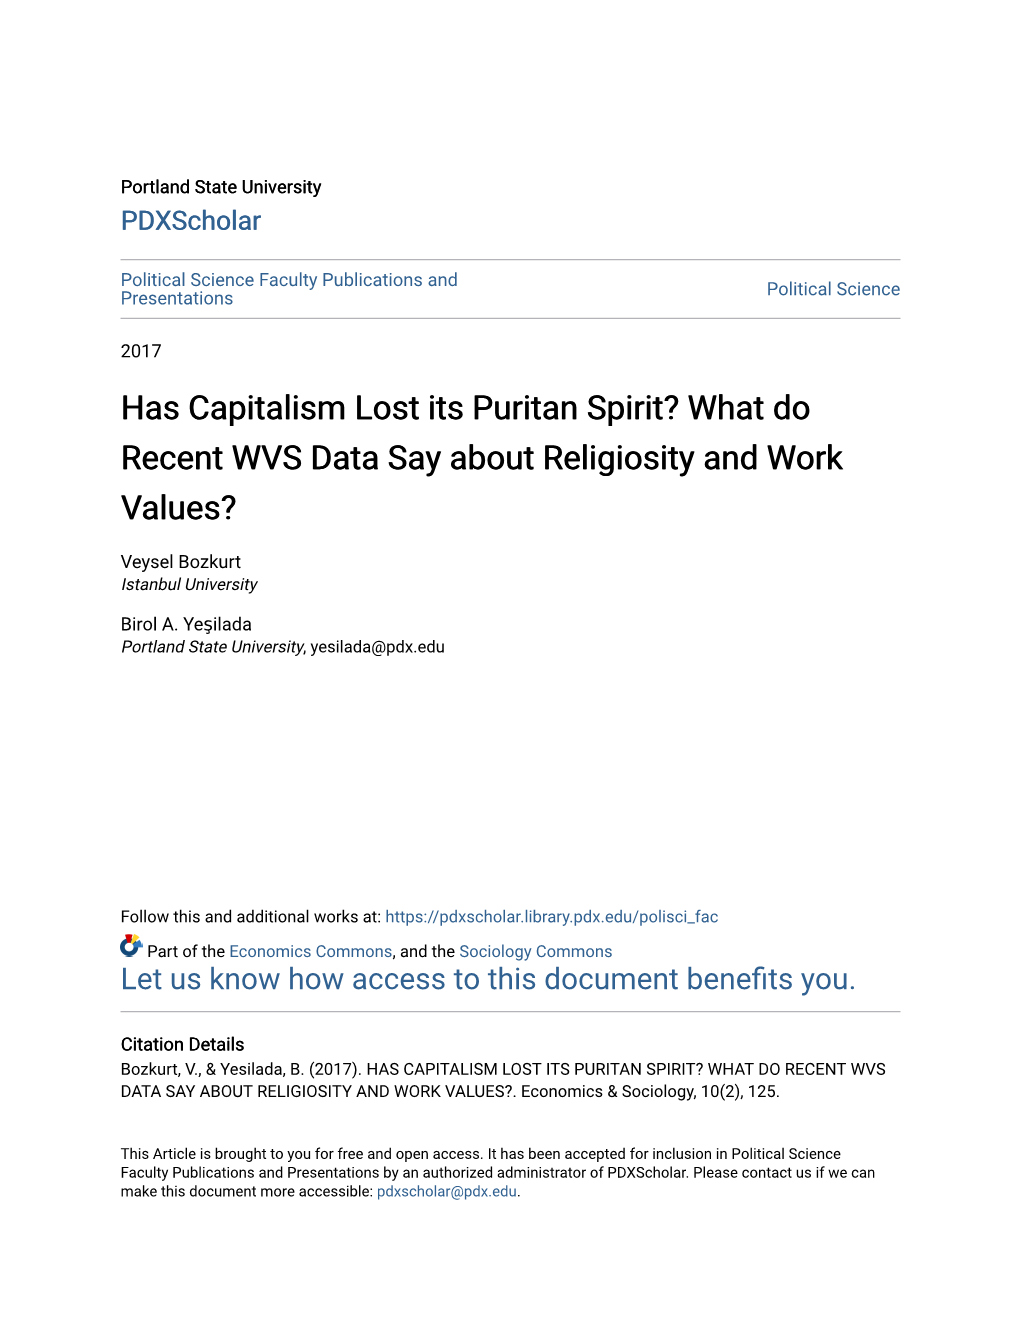 Has Capitalism Lost Its Puritan Spirit? What Do Recent WVS Data Say About Religiosity and Work Values?